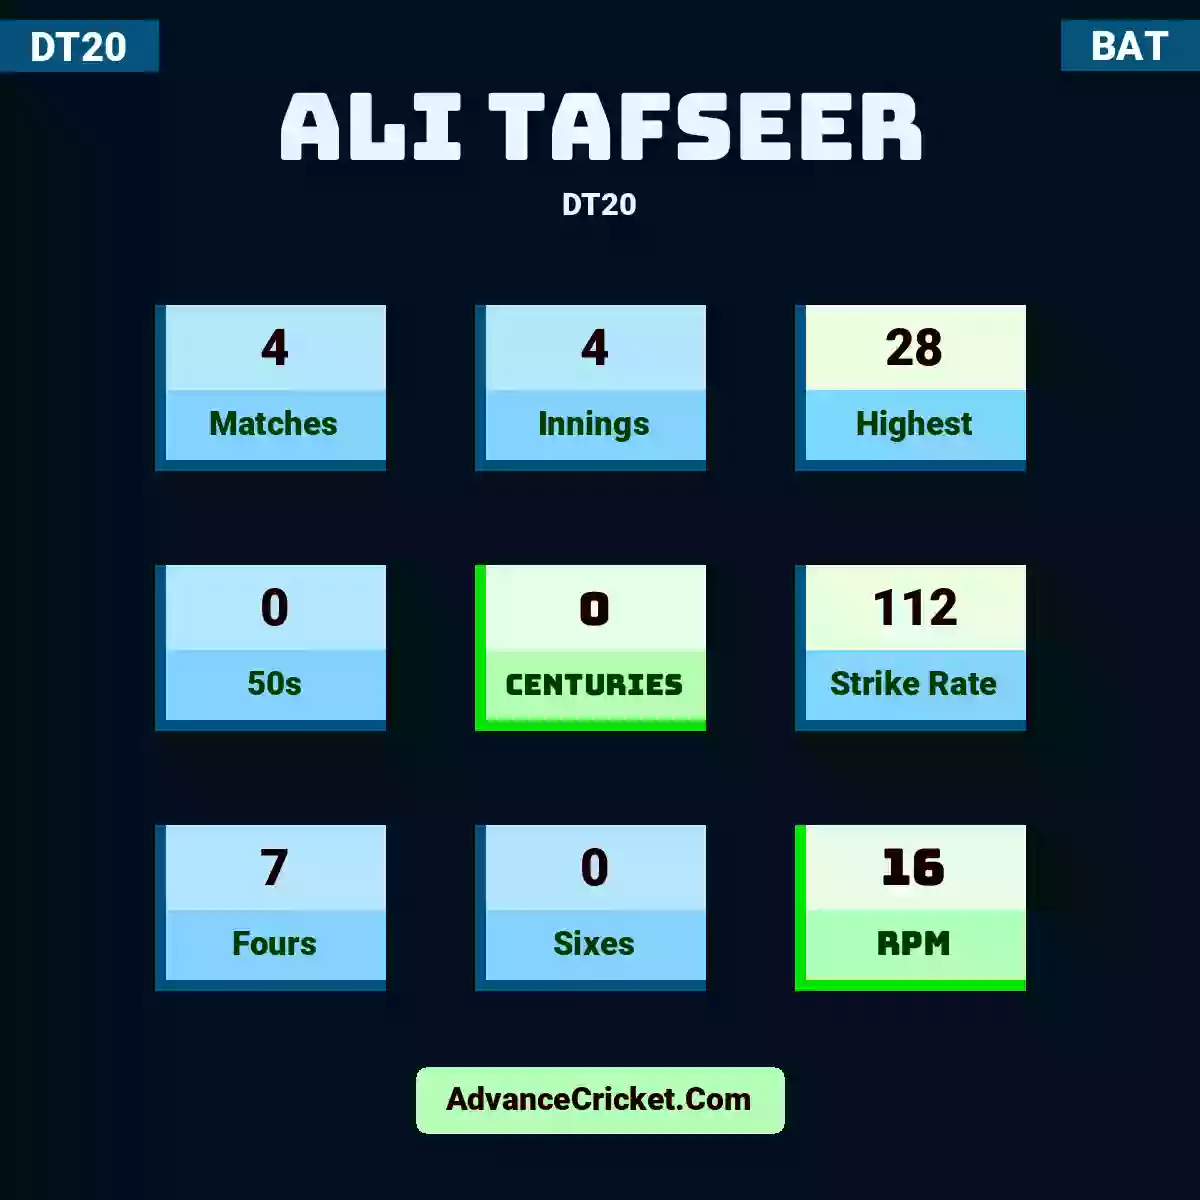 Ali Tafseer DT20 , Ali Tafseer played 4 matches, scored 28 runs as highest, 0 half-centuries, and 0 centuries, with a strike rate of 112. A.Tafseer hit 7 fours and 0 sixes, with an RPM of 16.